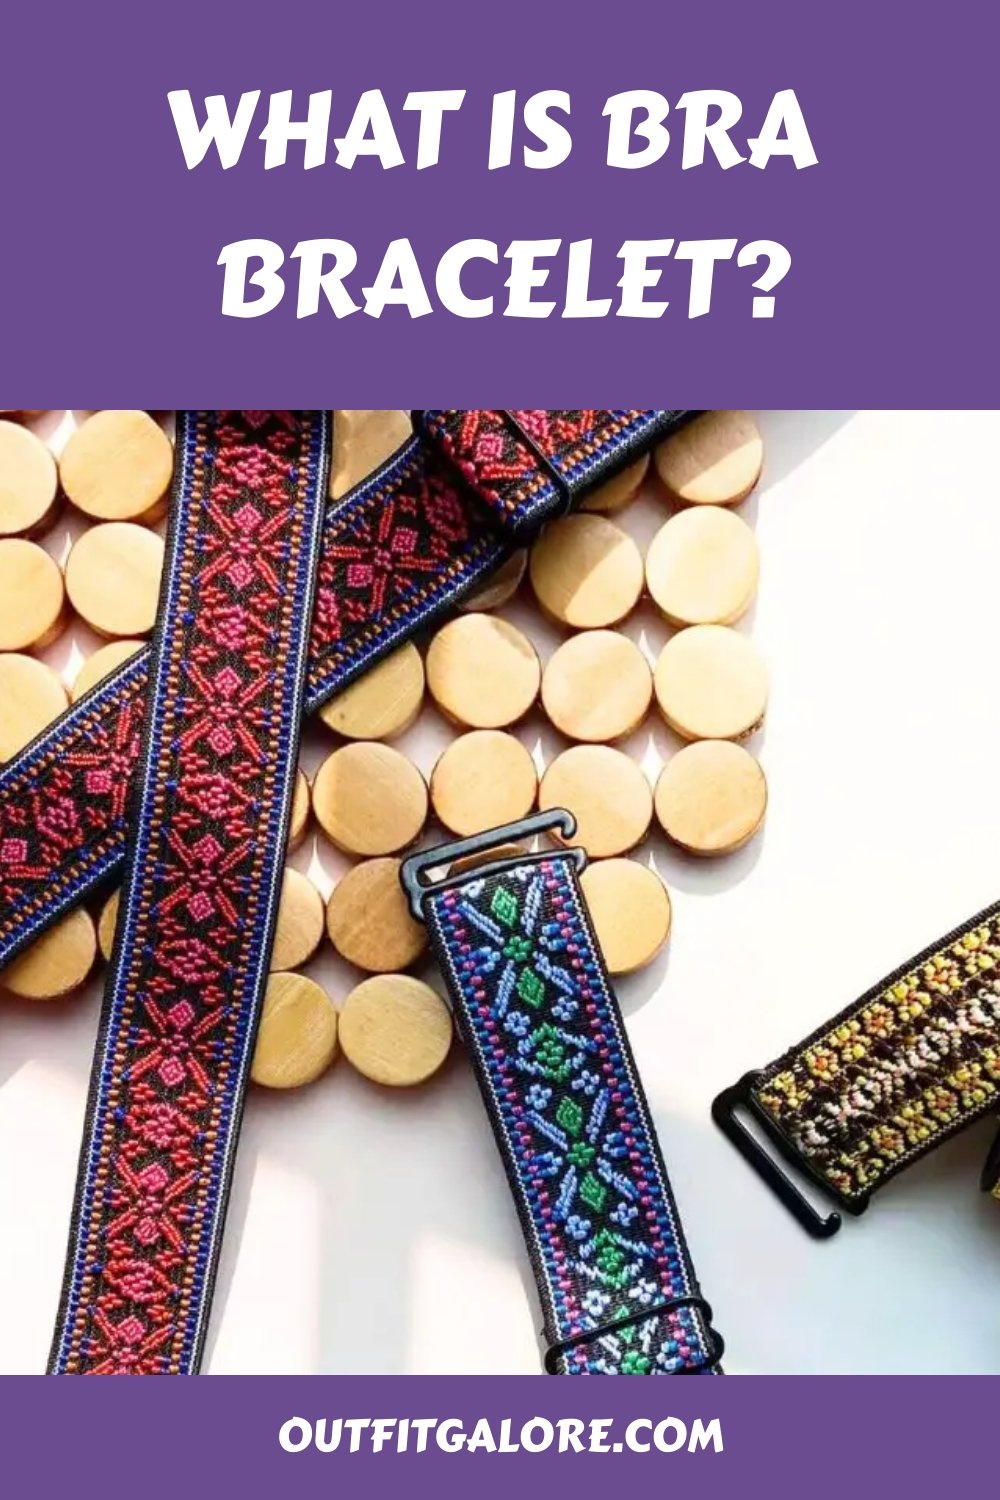 What Is A Bra Bracelet? - Outfit Galore